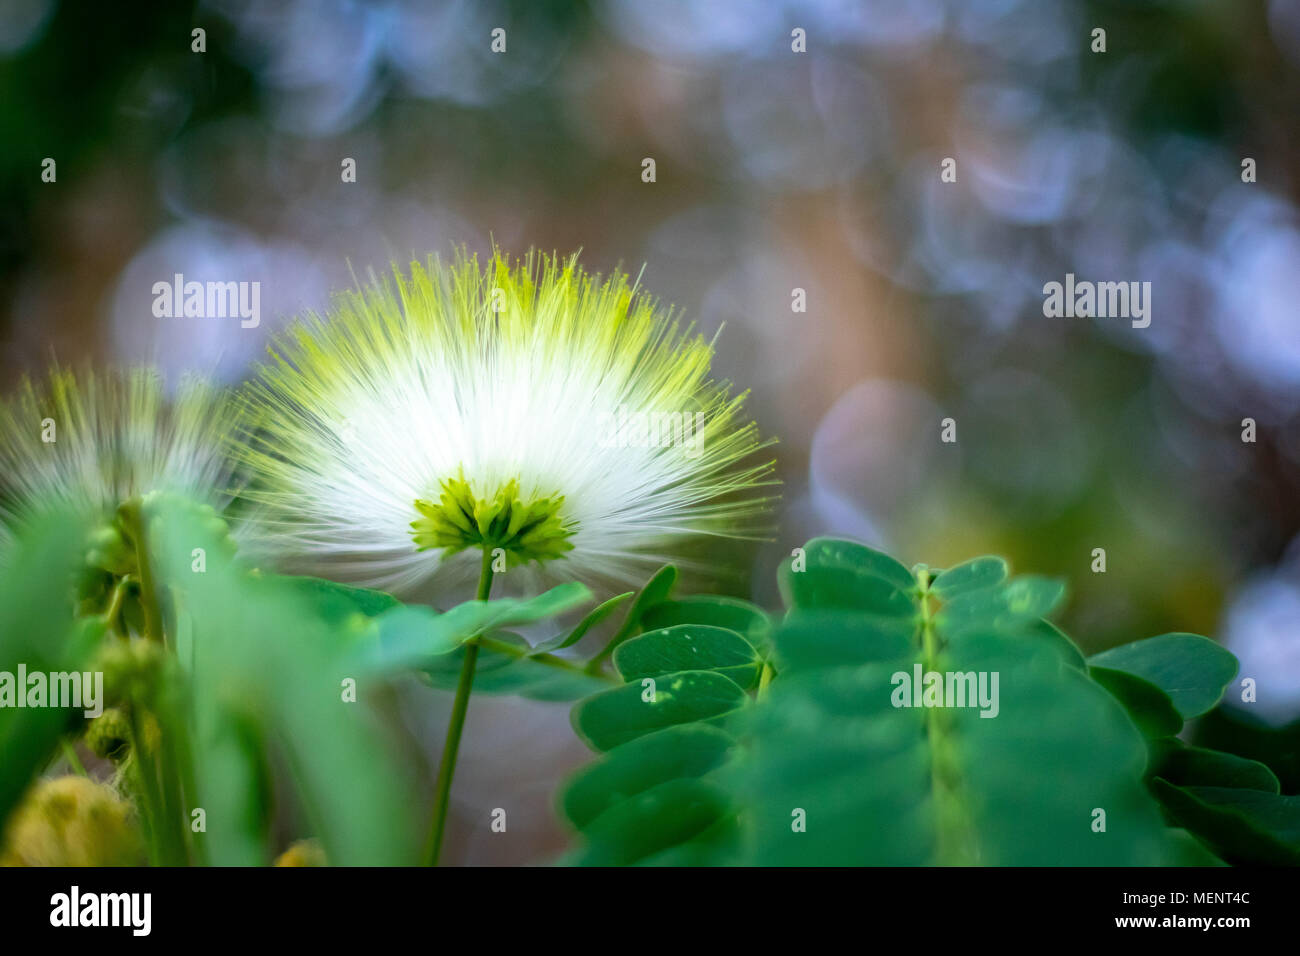 Isolated Albizia kalkora white flower against green and magenda out of focus background Stock Photo